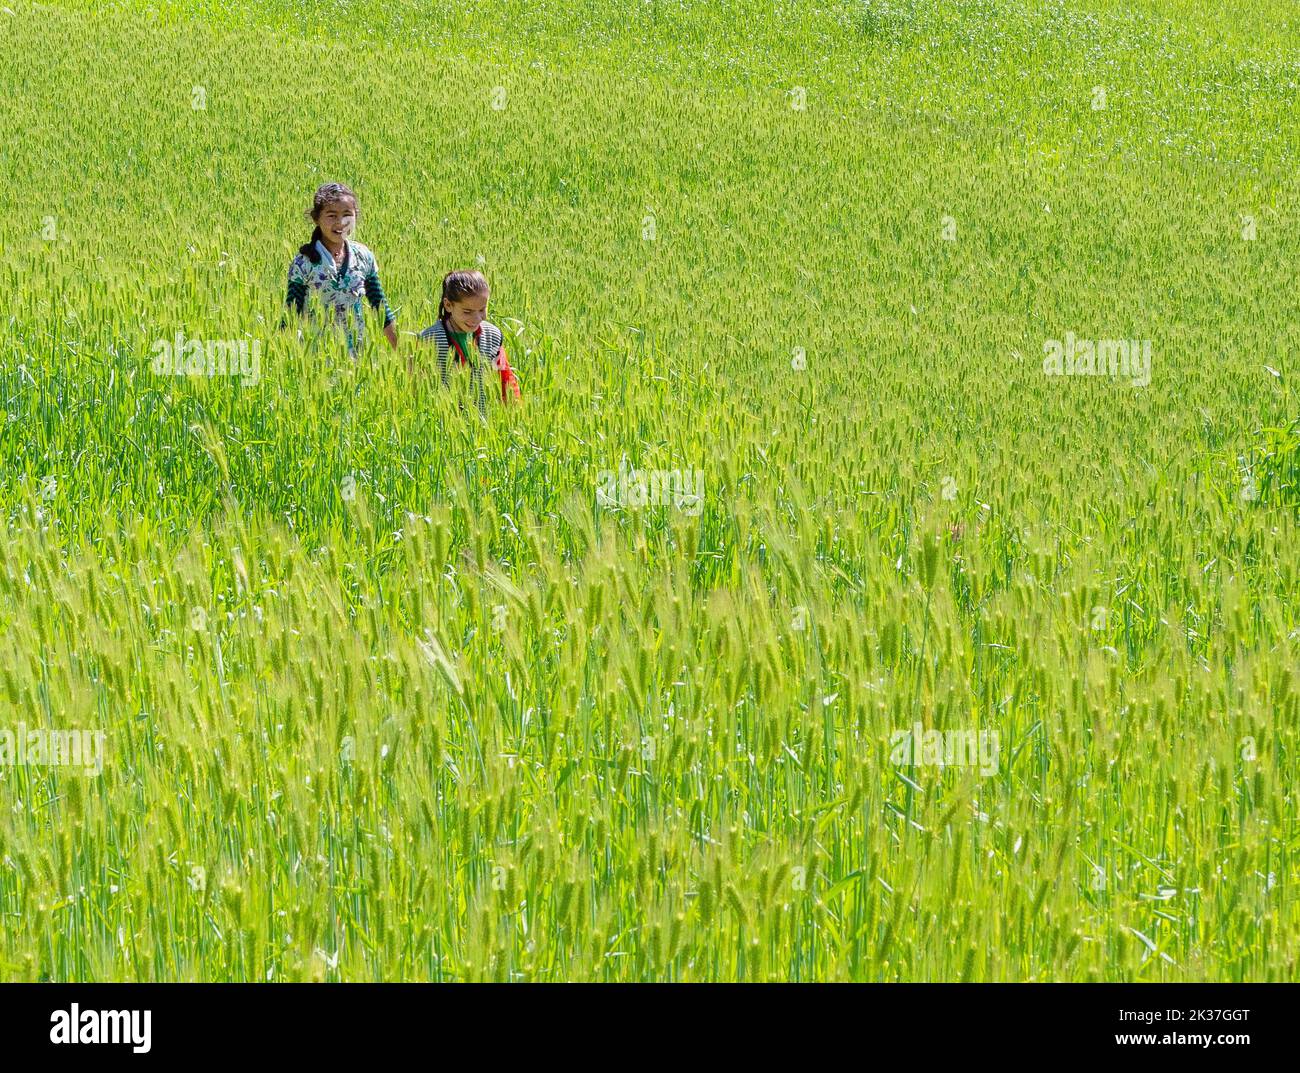 Happy smiling children walking home from school through lush fields of barley in the village of Supi Uttarakhand Northern India Stock Photo